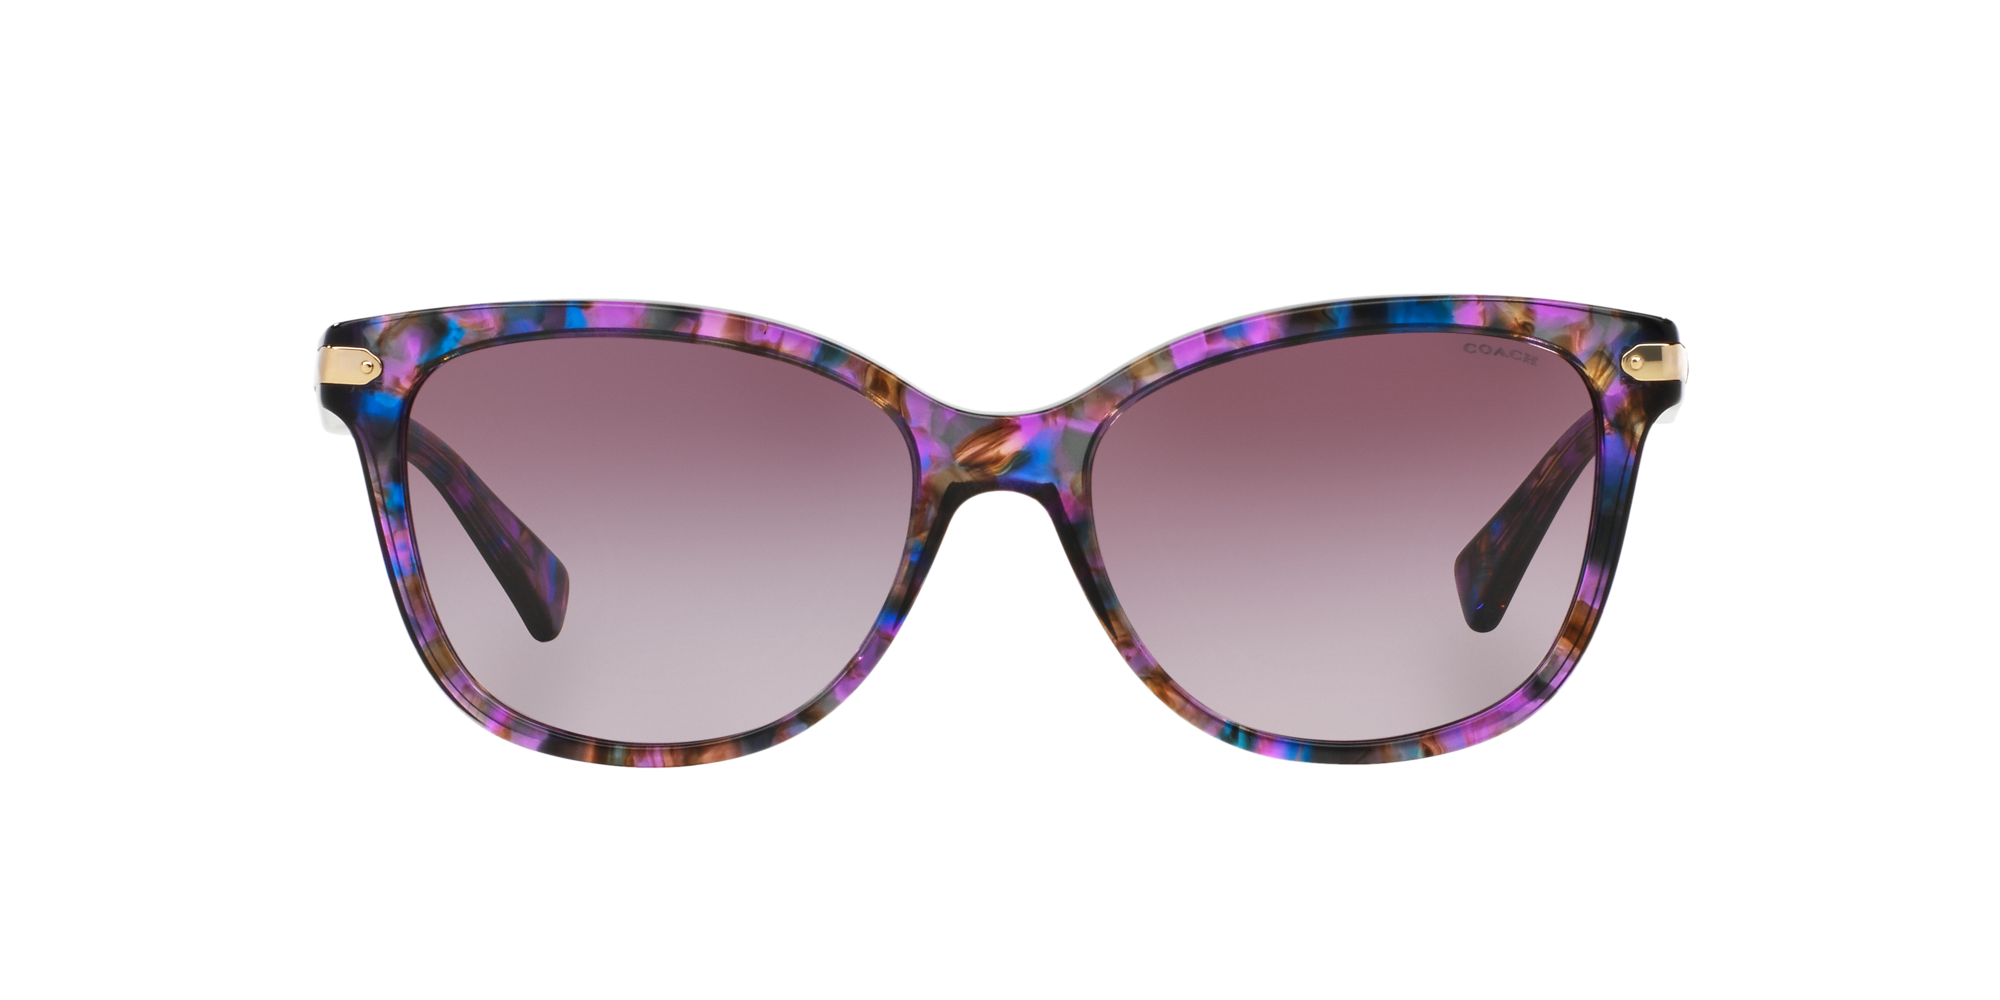 [products.image.front] Coach HC 8132 Sunglasses